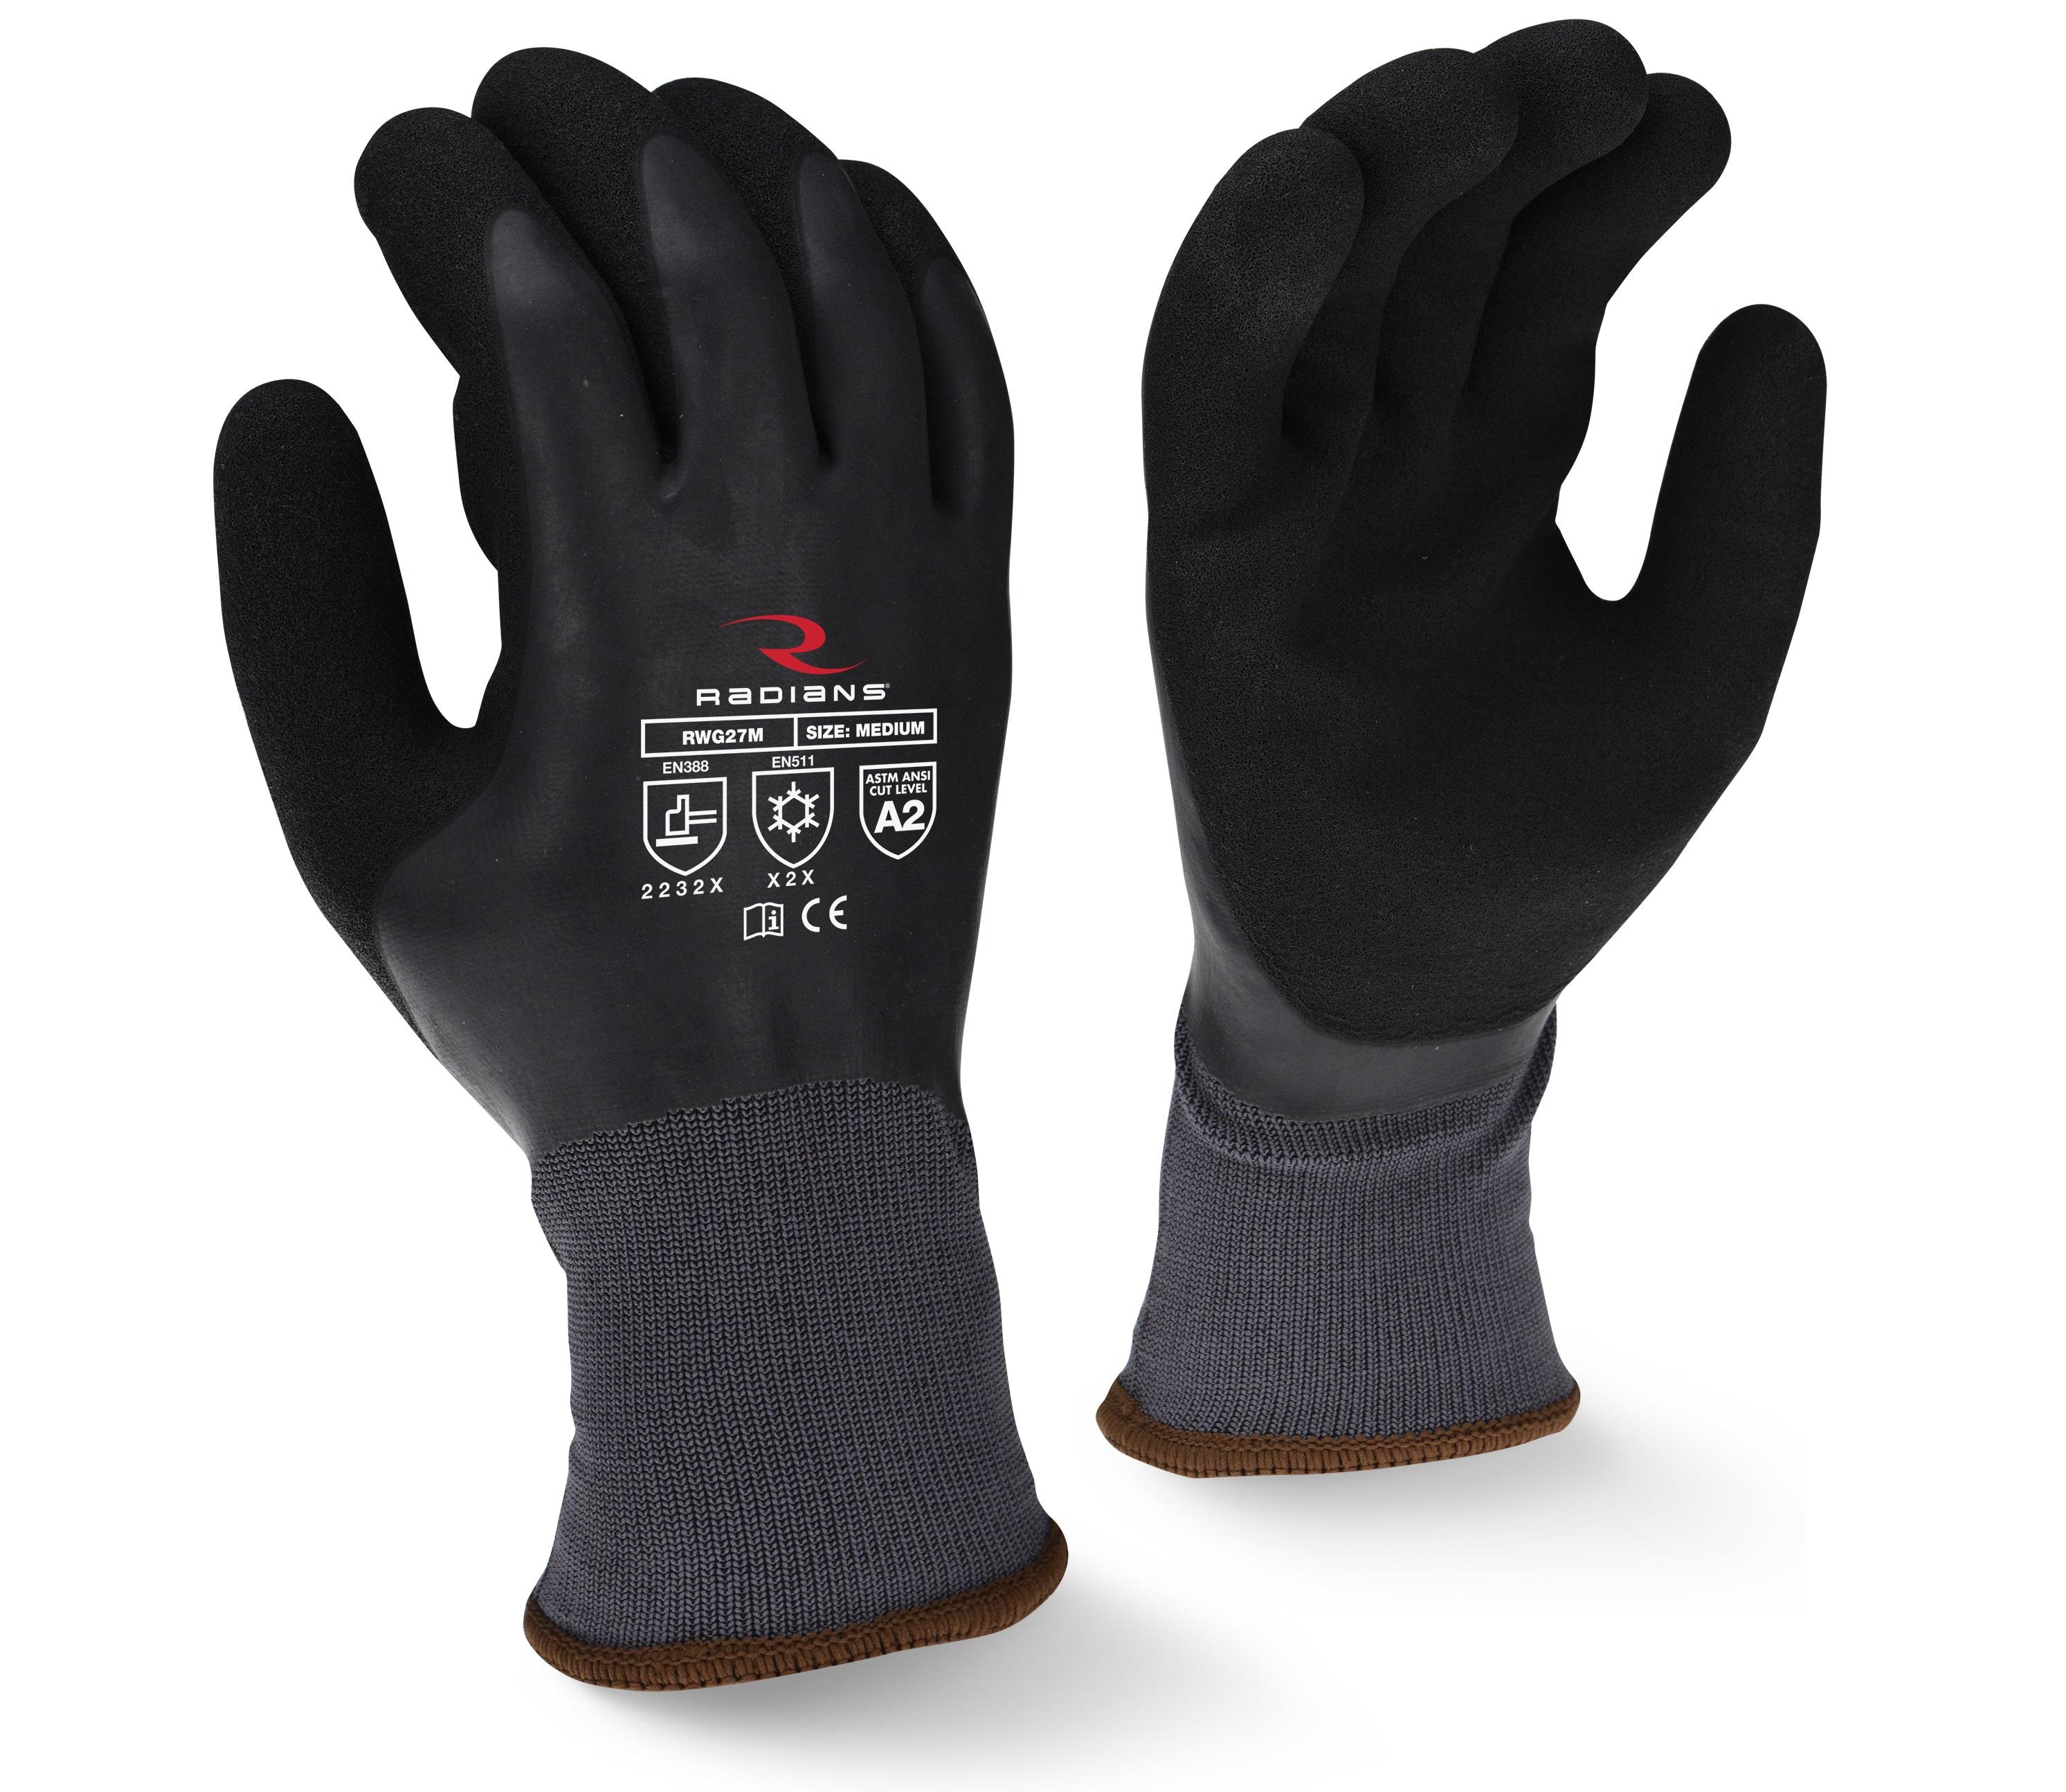 RADIANS RWG28 FULL LATEX WINTER GLOVE - Cold-Resistant Gloves